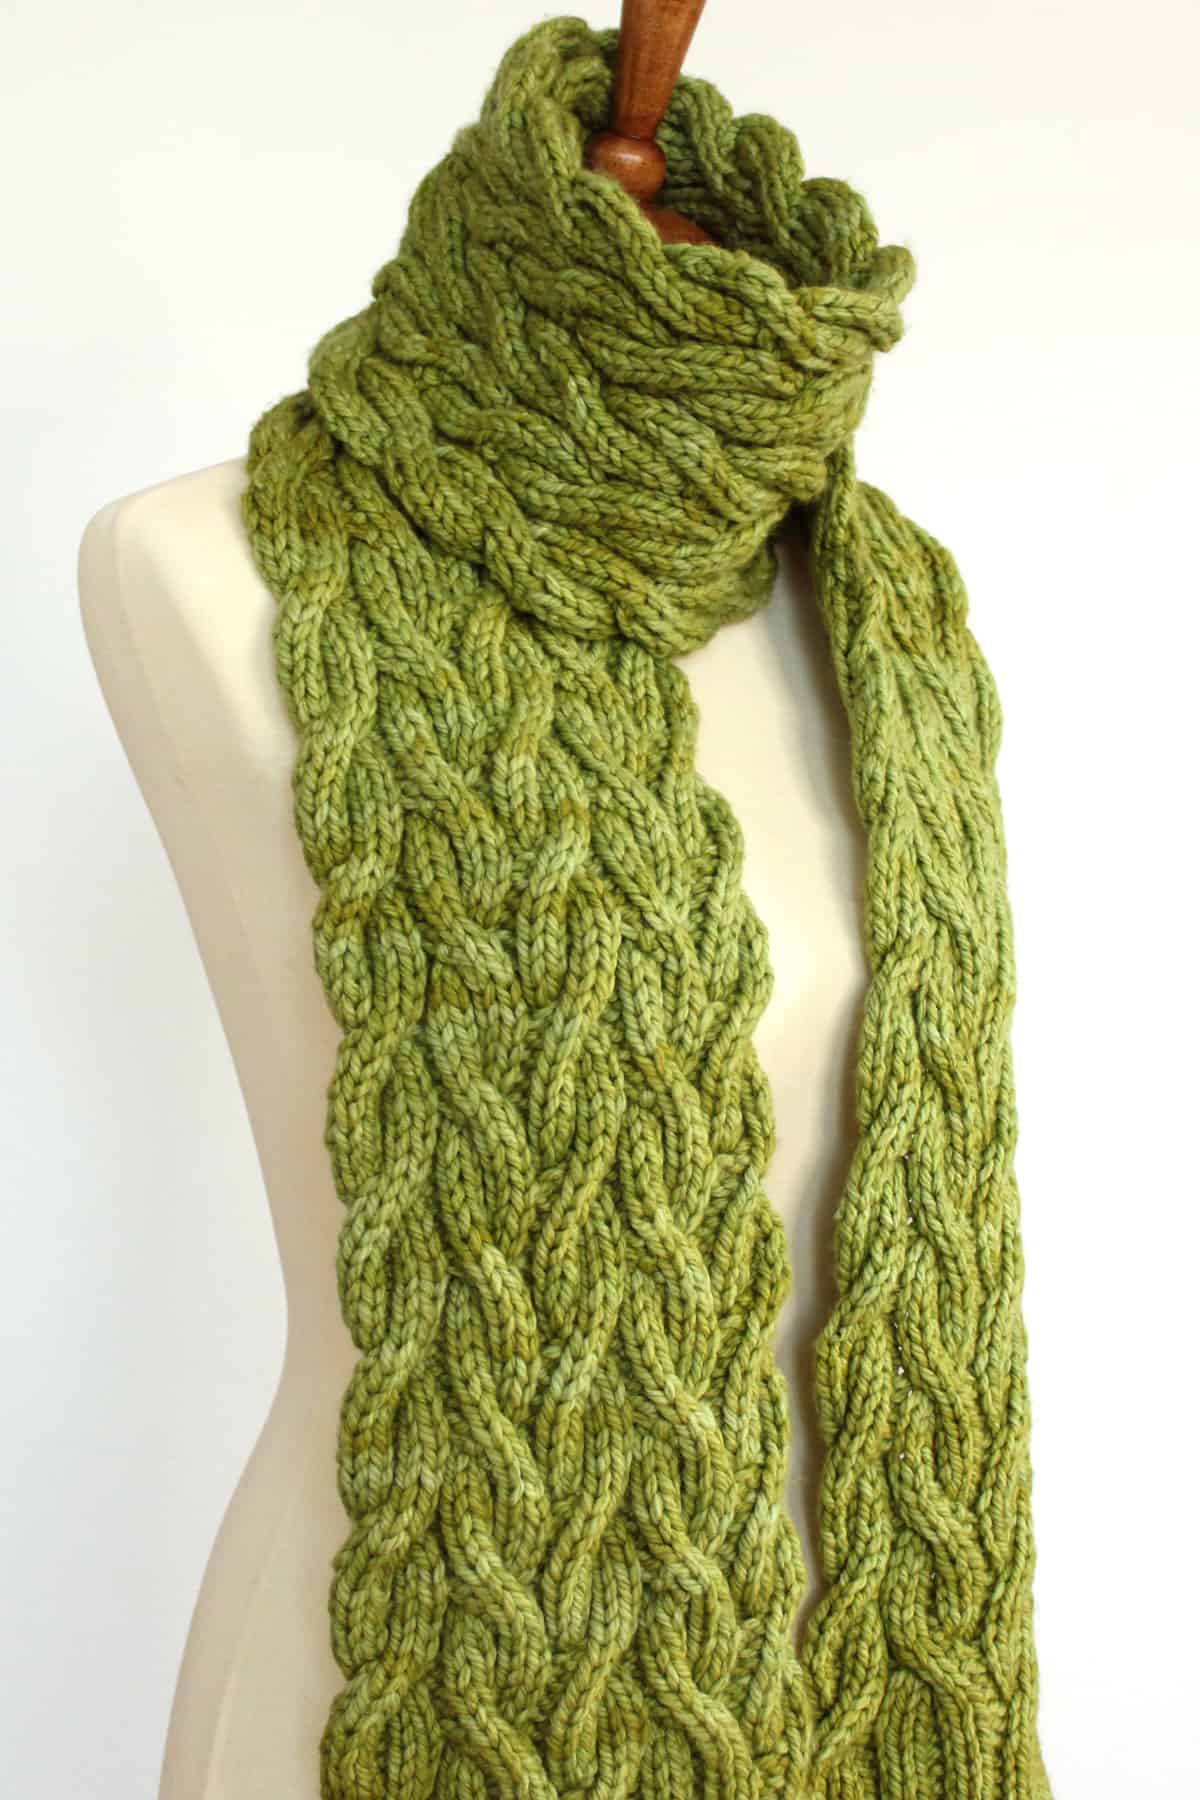 Meadow Vine Reversible Cable Scarf in green yarn displayed on mannequin.